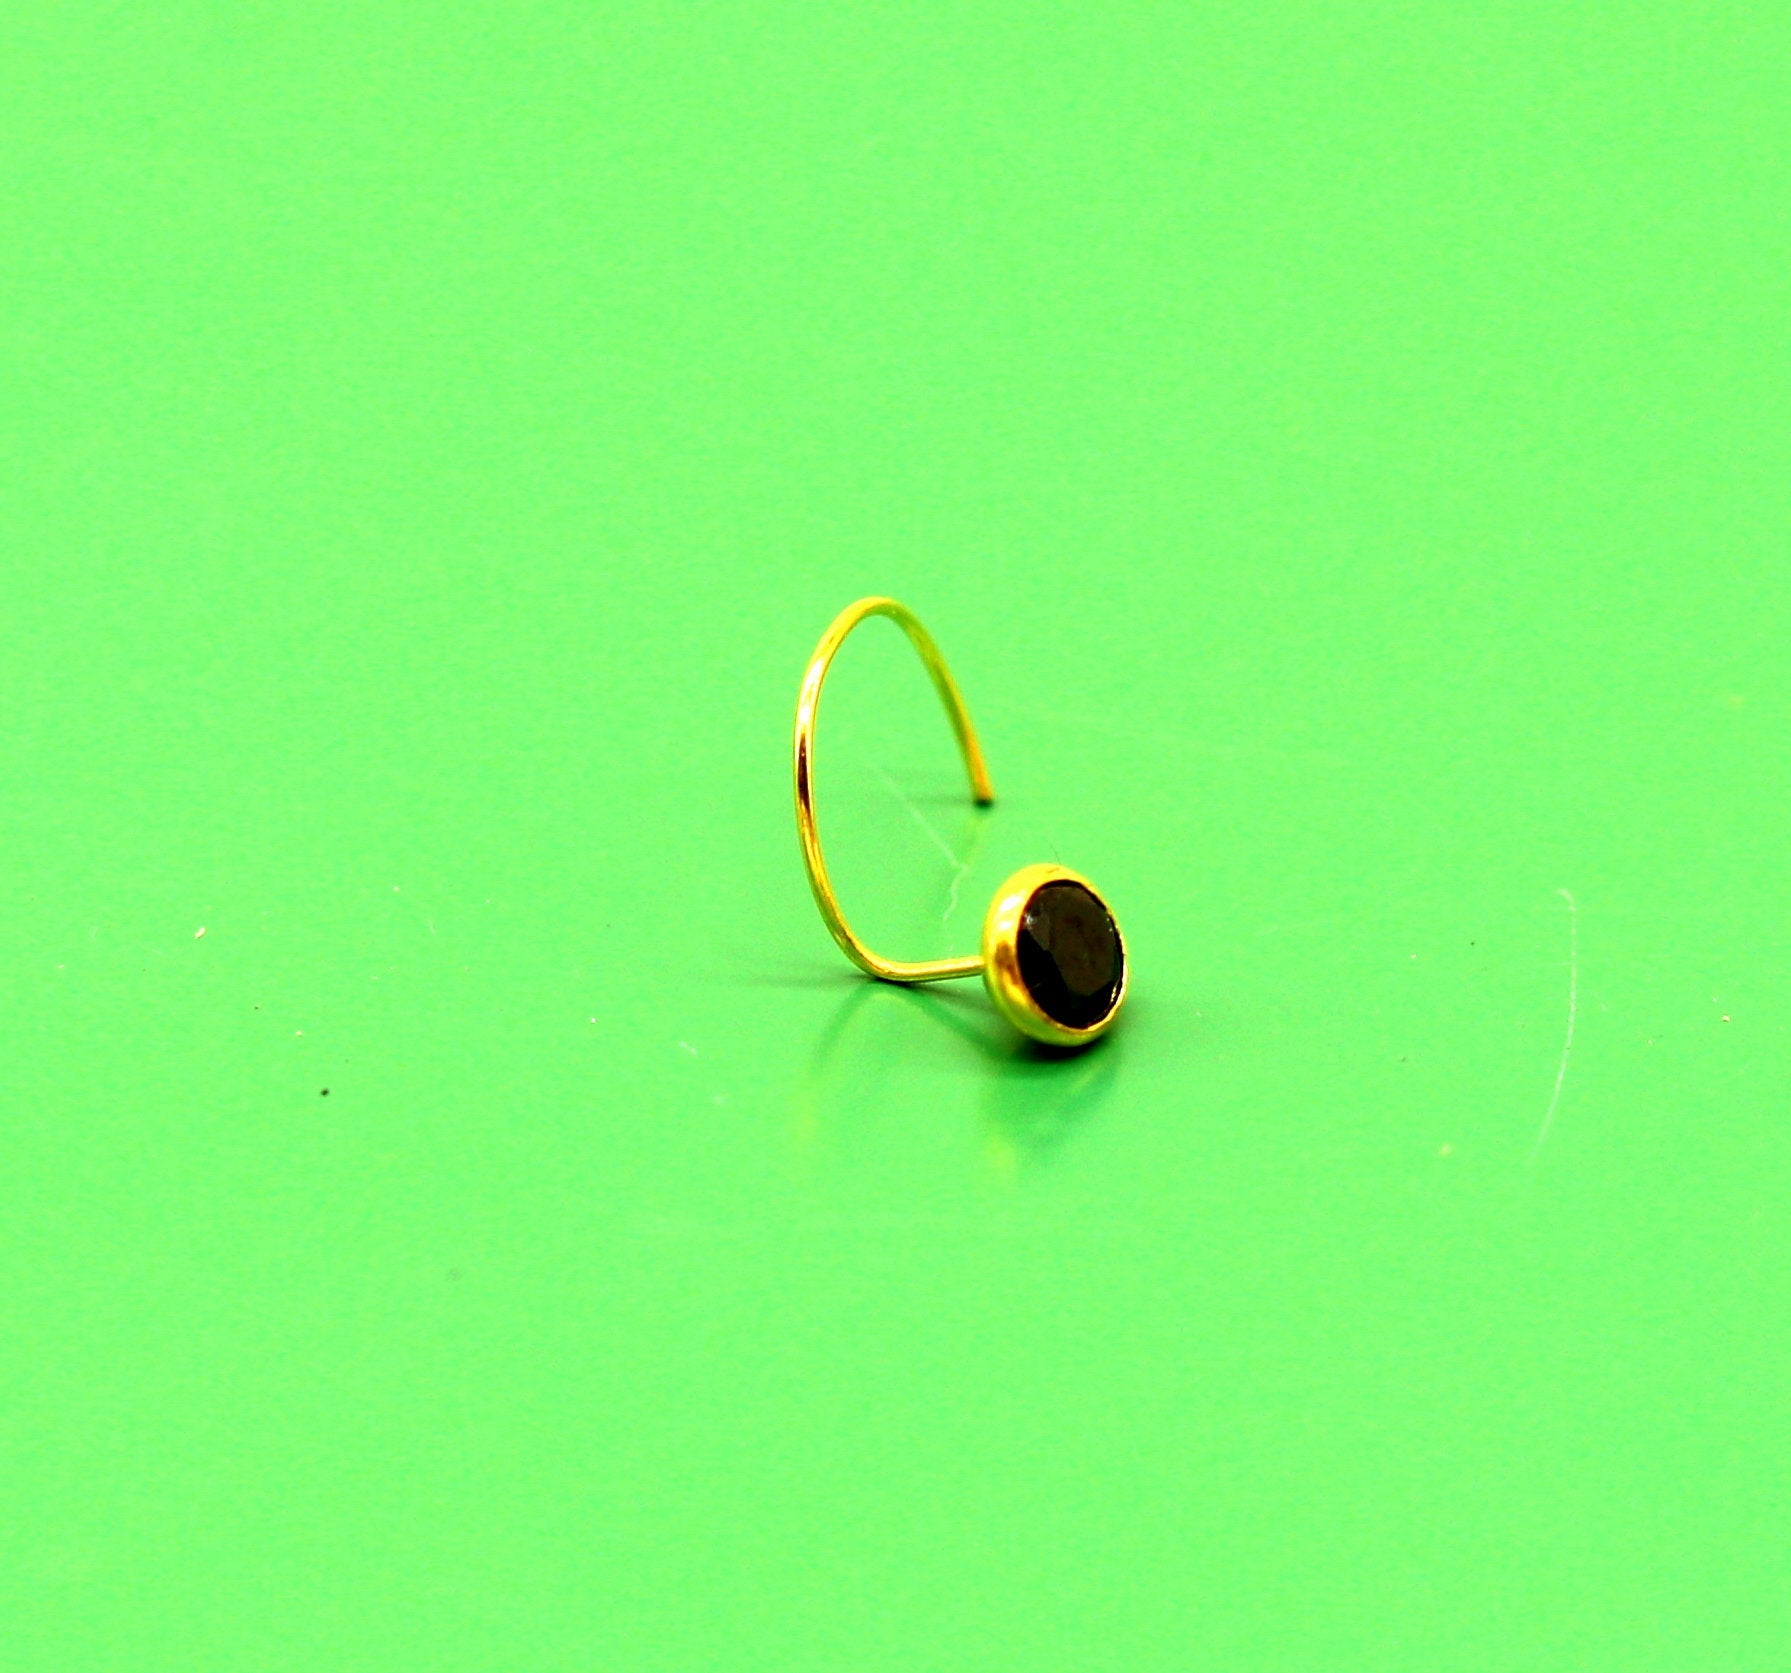 3.5mm tiny single black stone 18kt yellow gold handmade nose pin, excellent U band nose plug, nose wire, cartilage jewelry for girl's gnp33 - TRIBAL ORNAMENTS